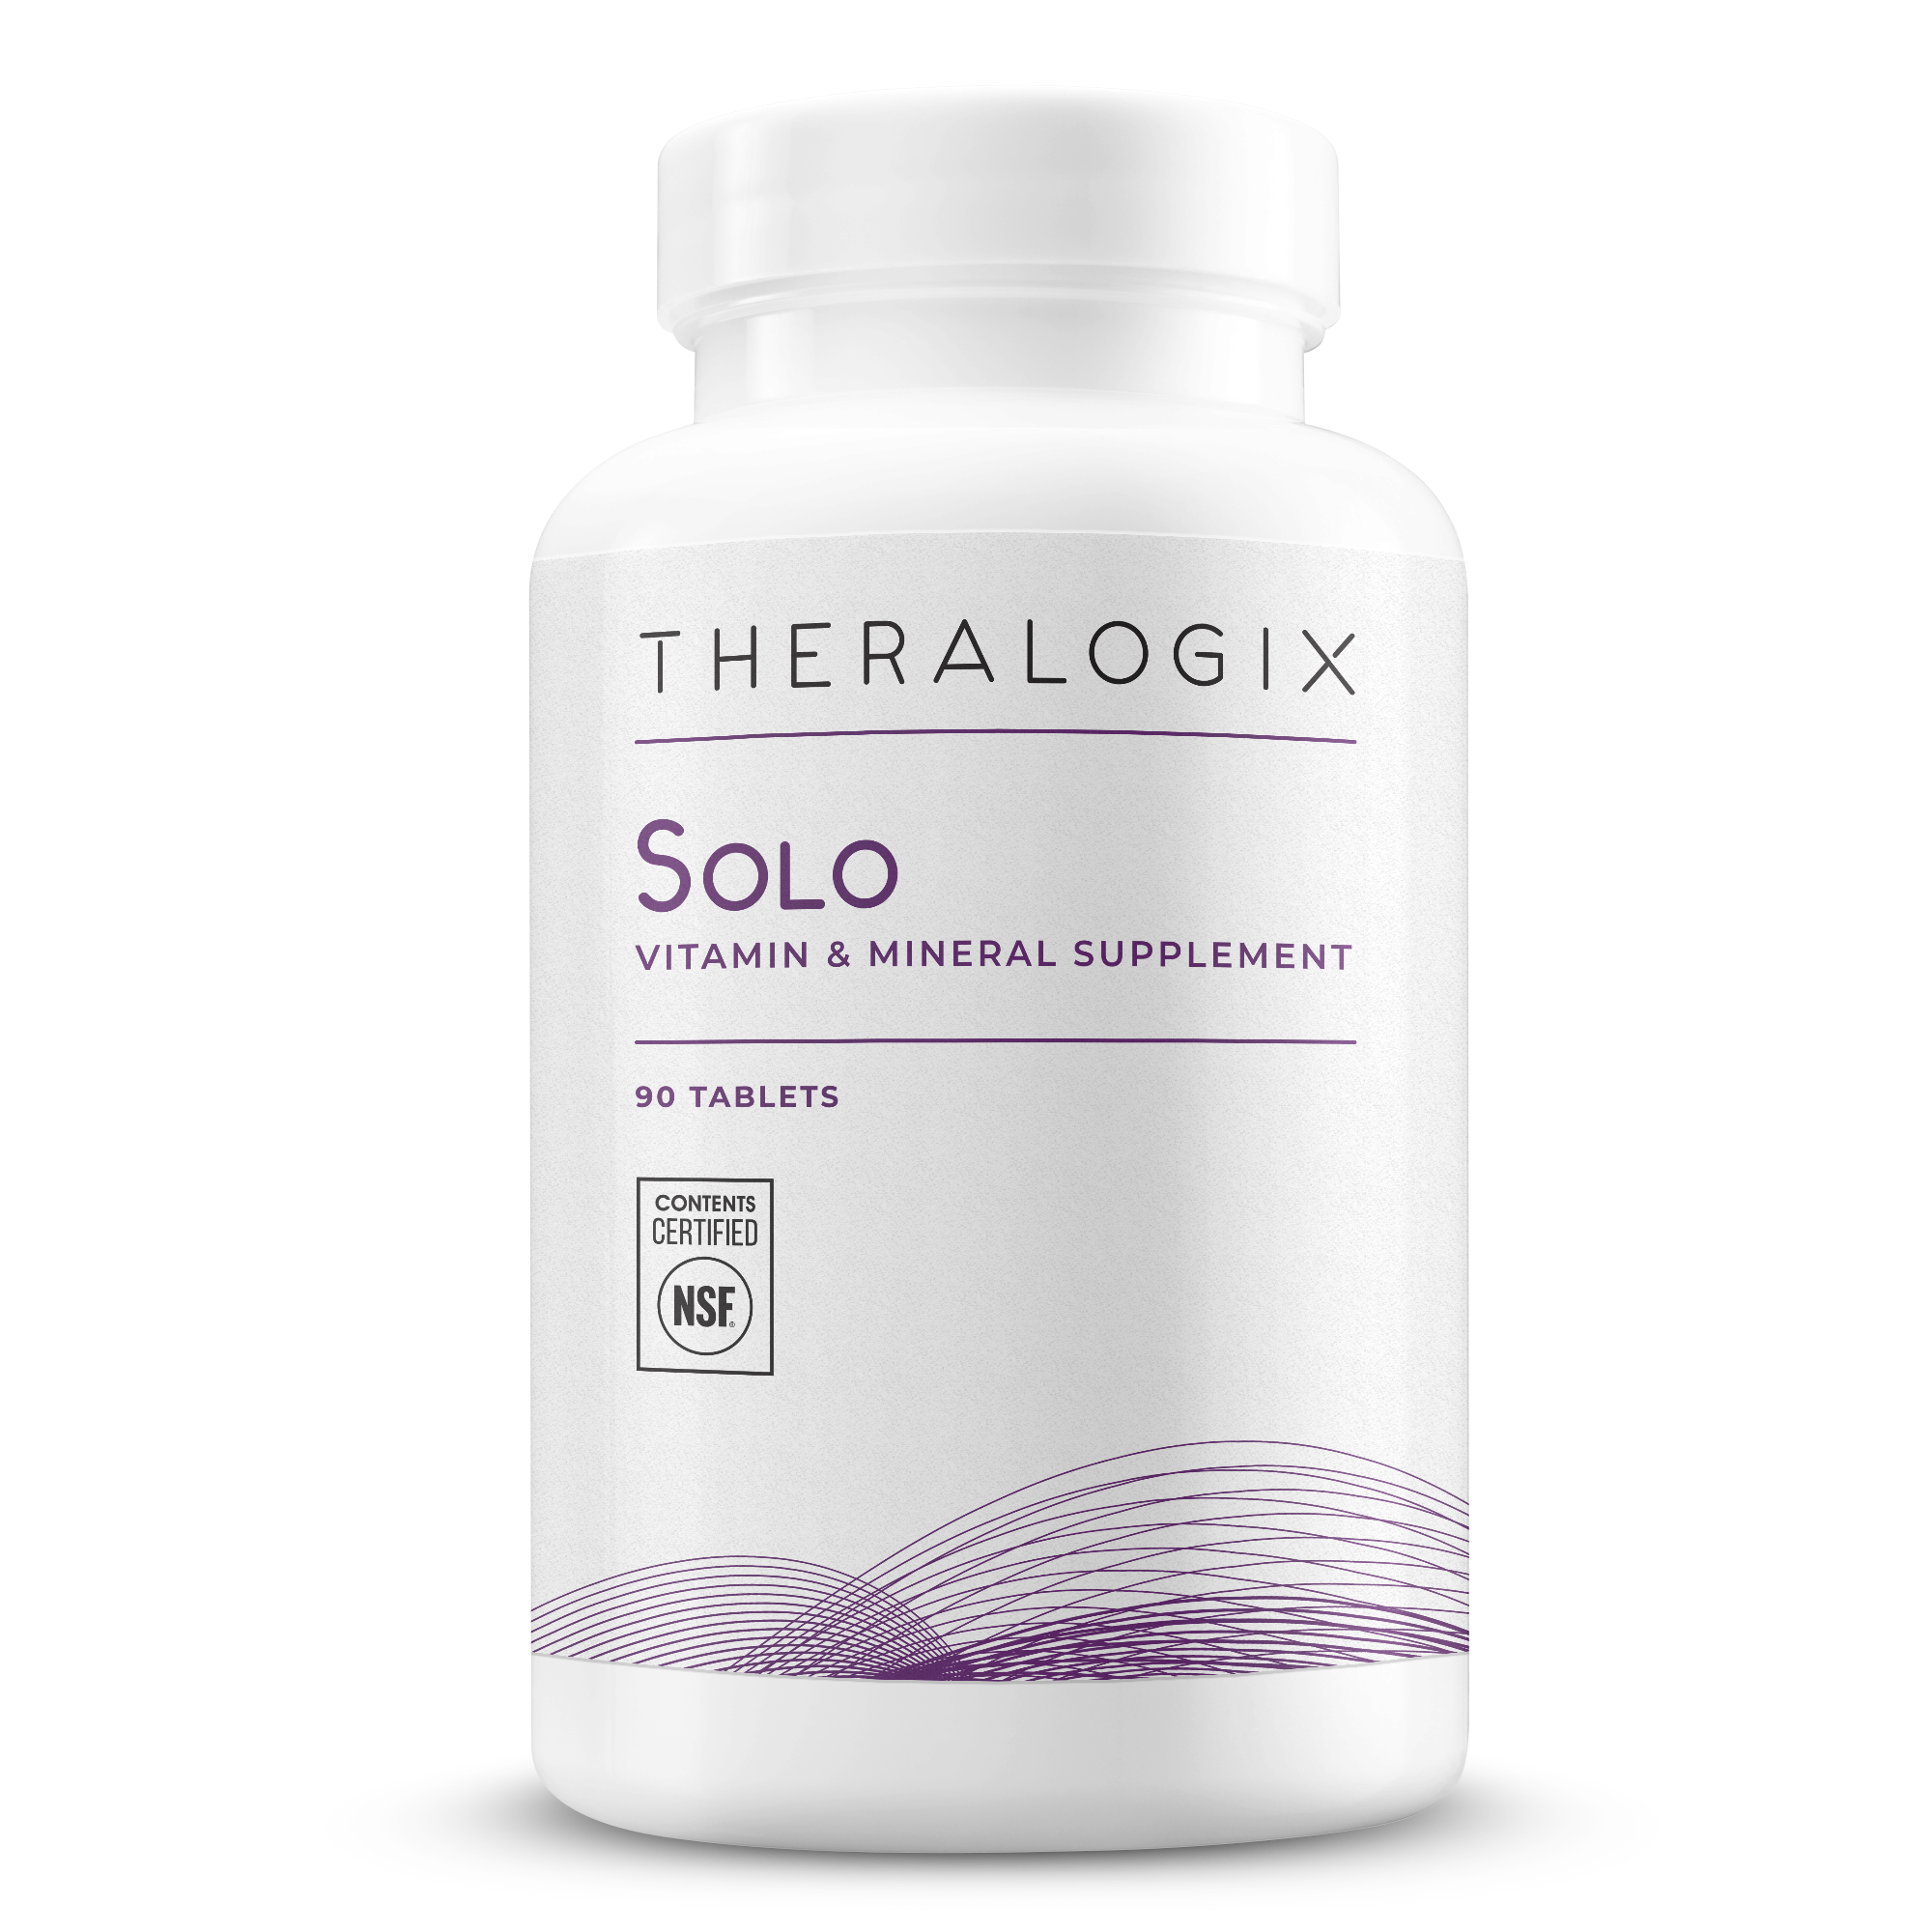 Solo Multivitamin and Supplement tablets contain a full range of vitamins and minerals, including 2,000 IU of vitamin D3 and other important nutrients, with no iron.